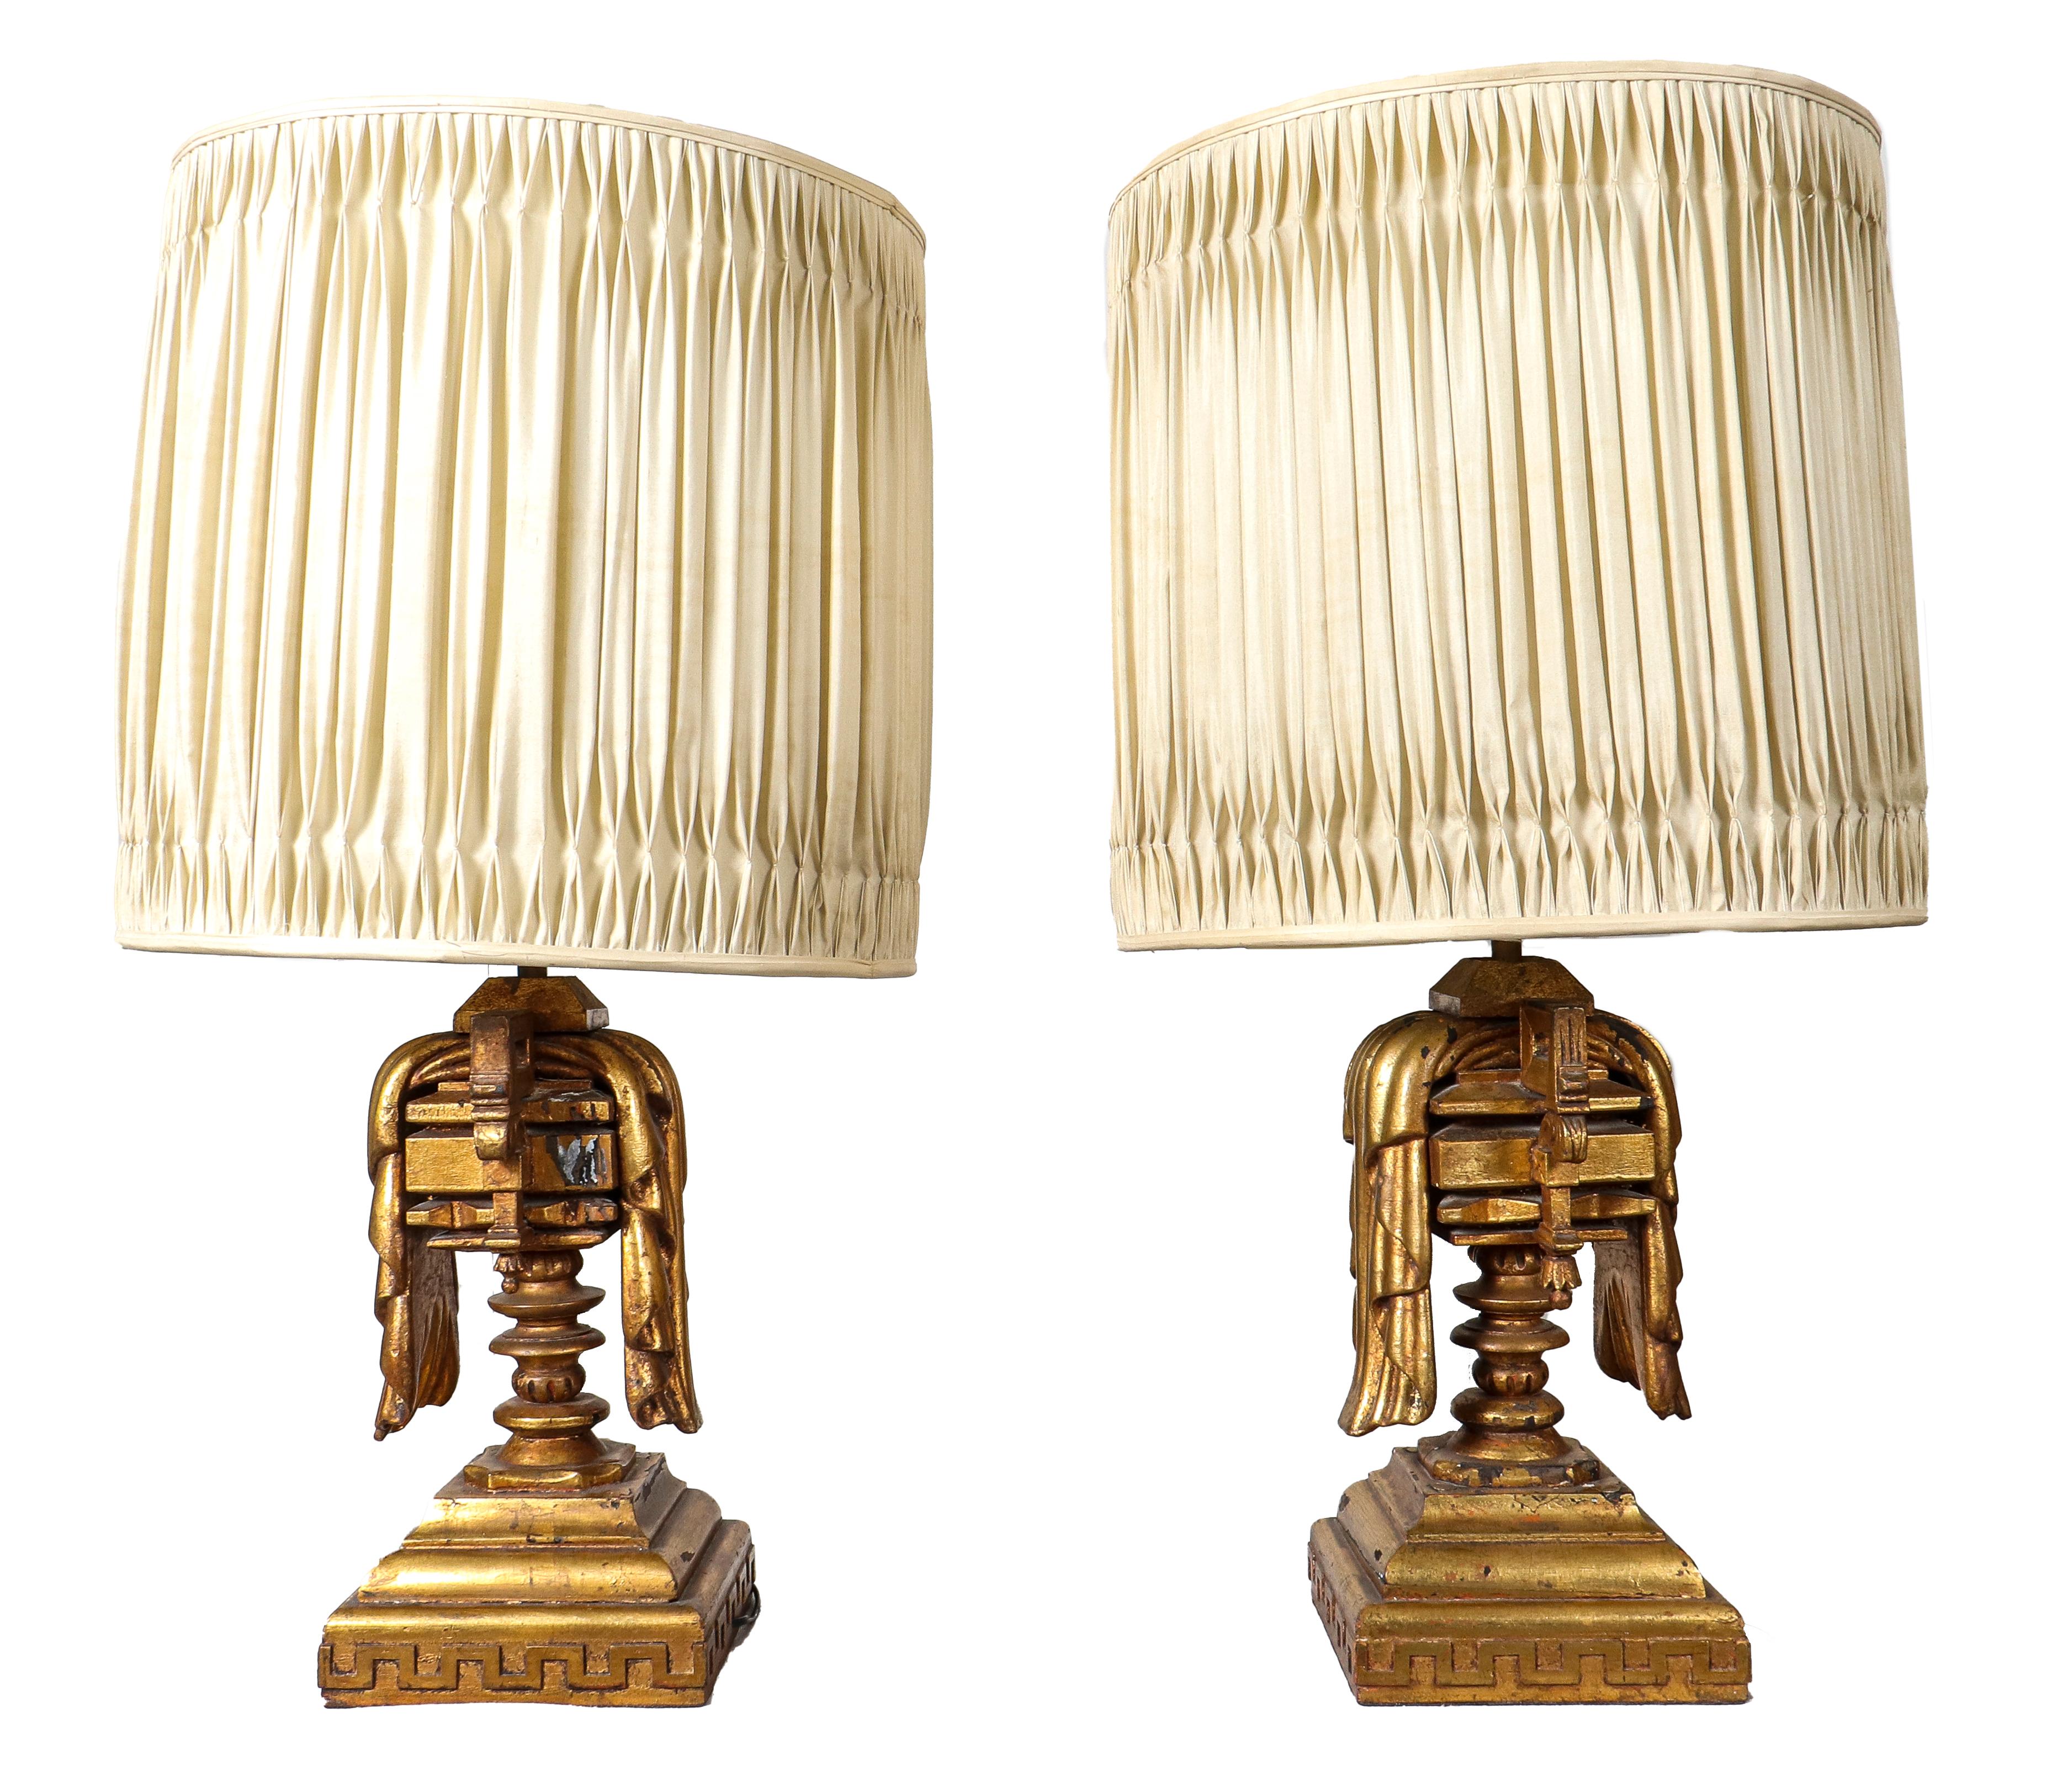 James Mont Mid-Century Modern carved giltwood table lamps, designed circa 1960, composed of older elements.